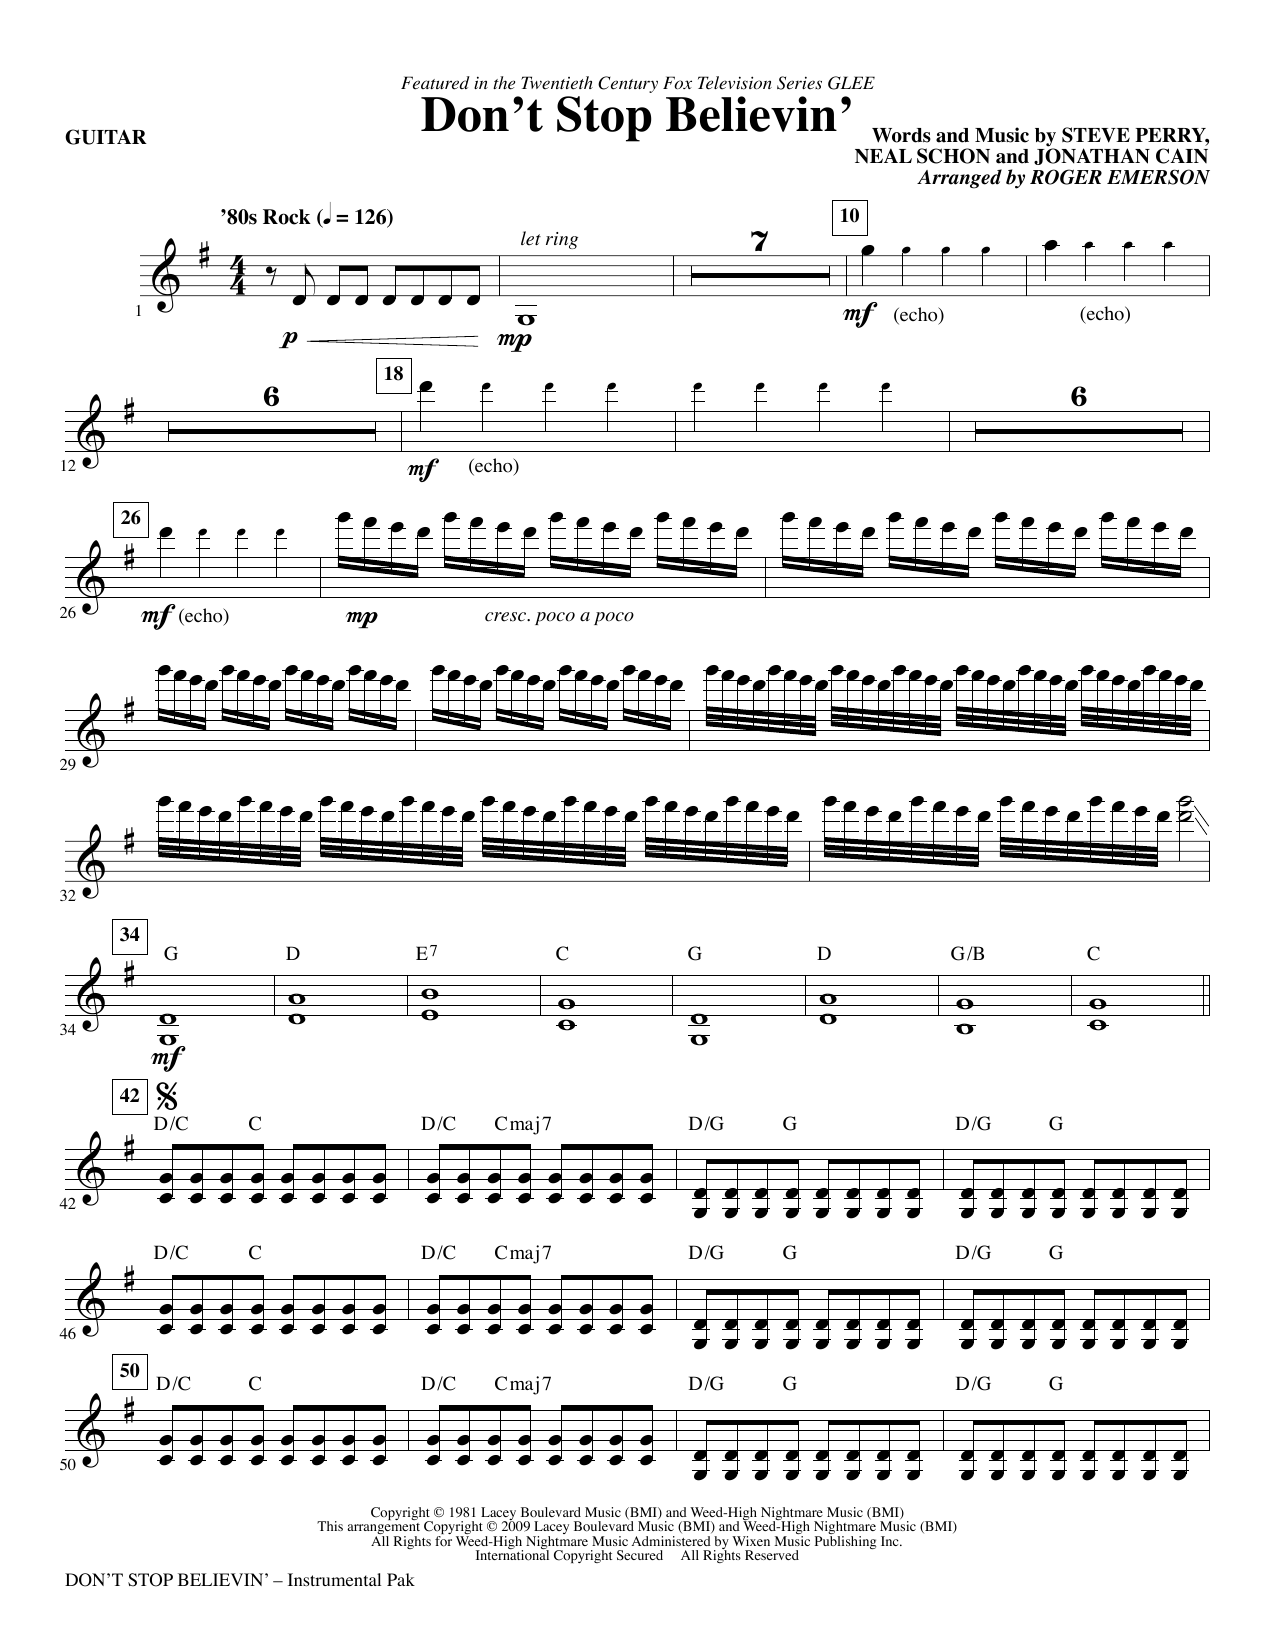 Download Roger Emerson Don't Stop Believin' - Guitar Sheet Music